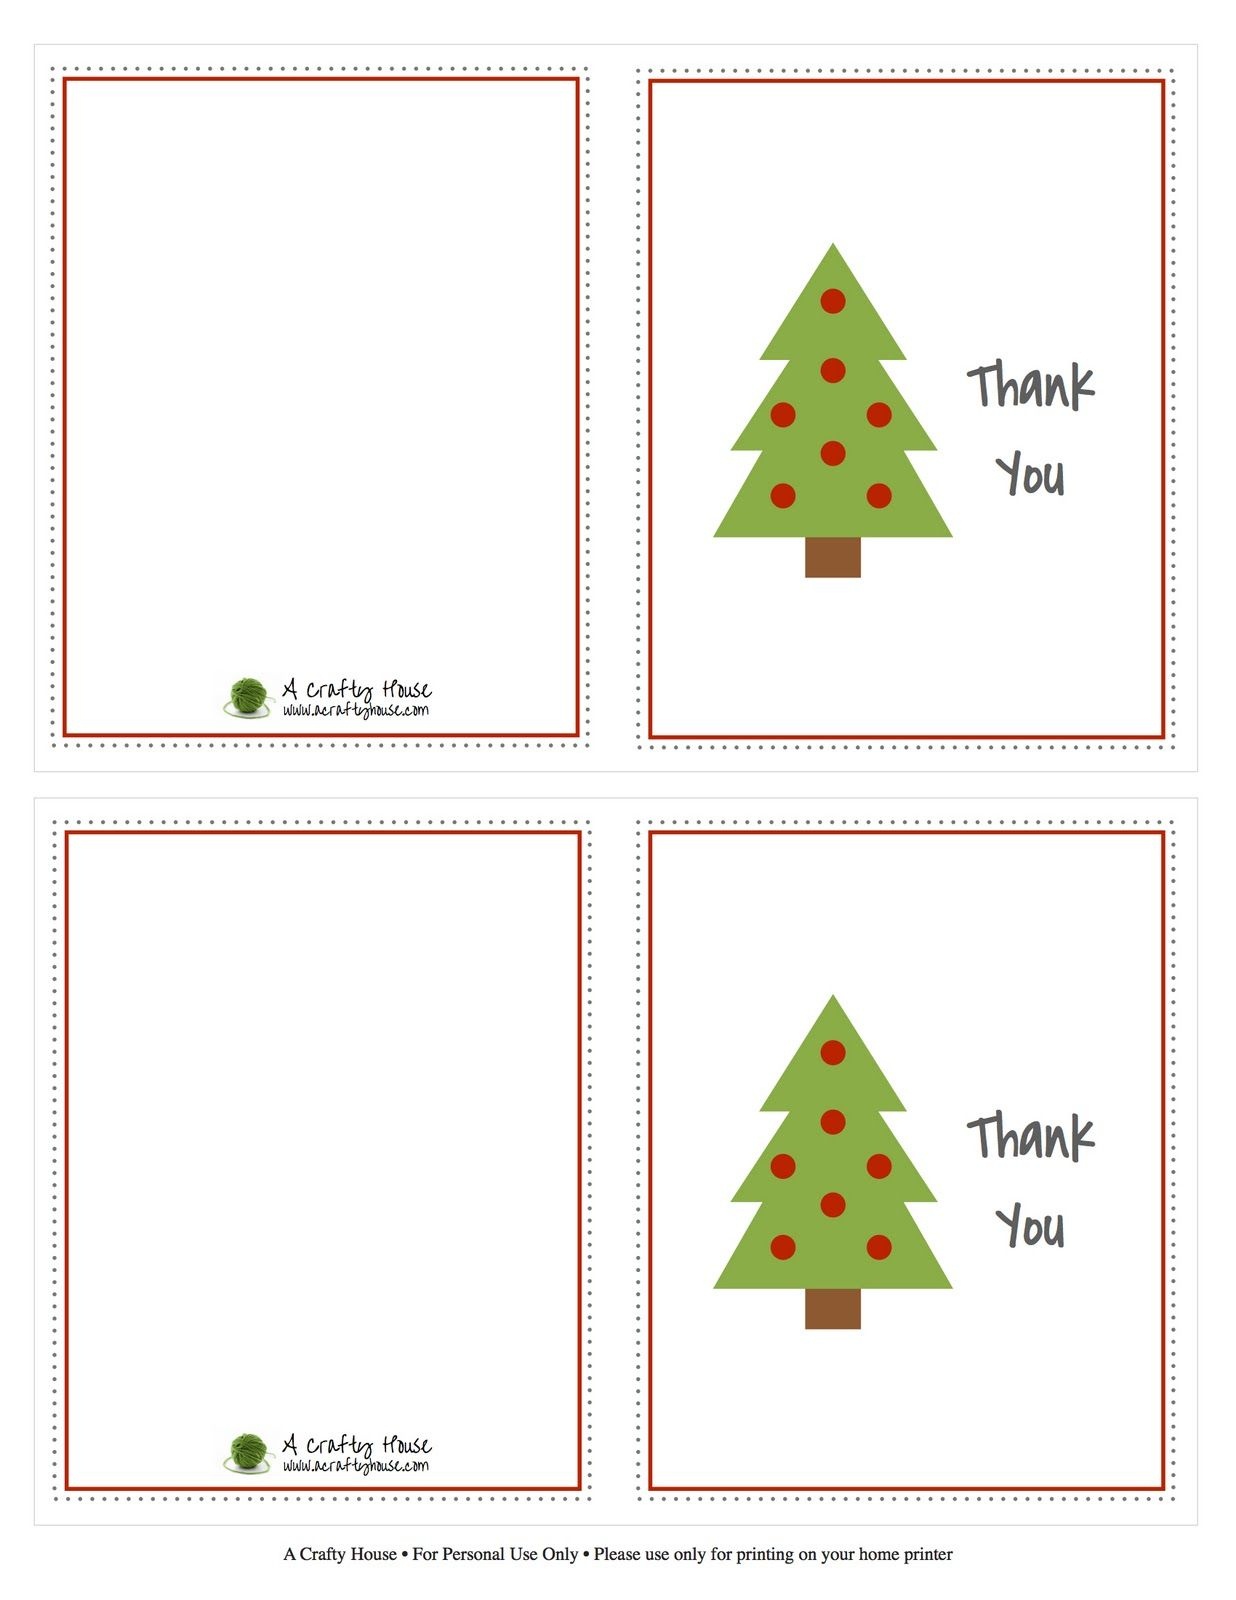 Free Printable Christmas Card Thank You Note | A Crafty House - Free Christmas Thank You Notes Printable